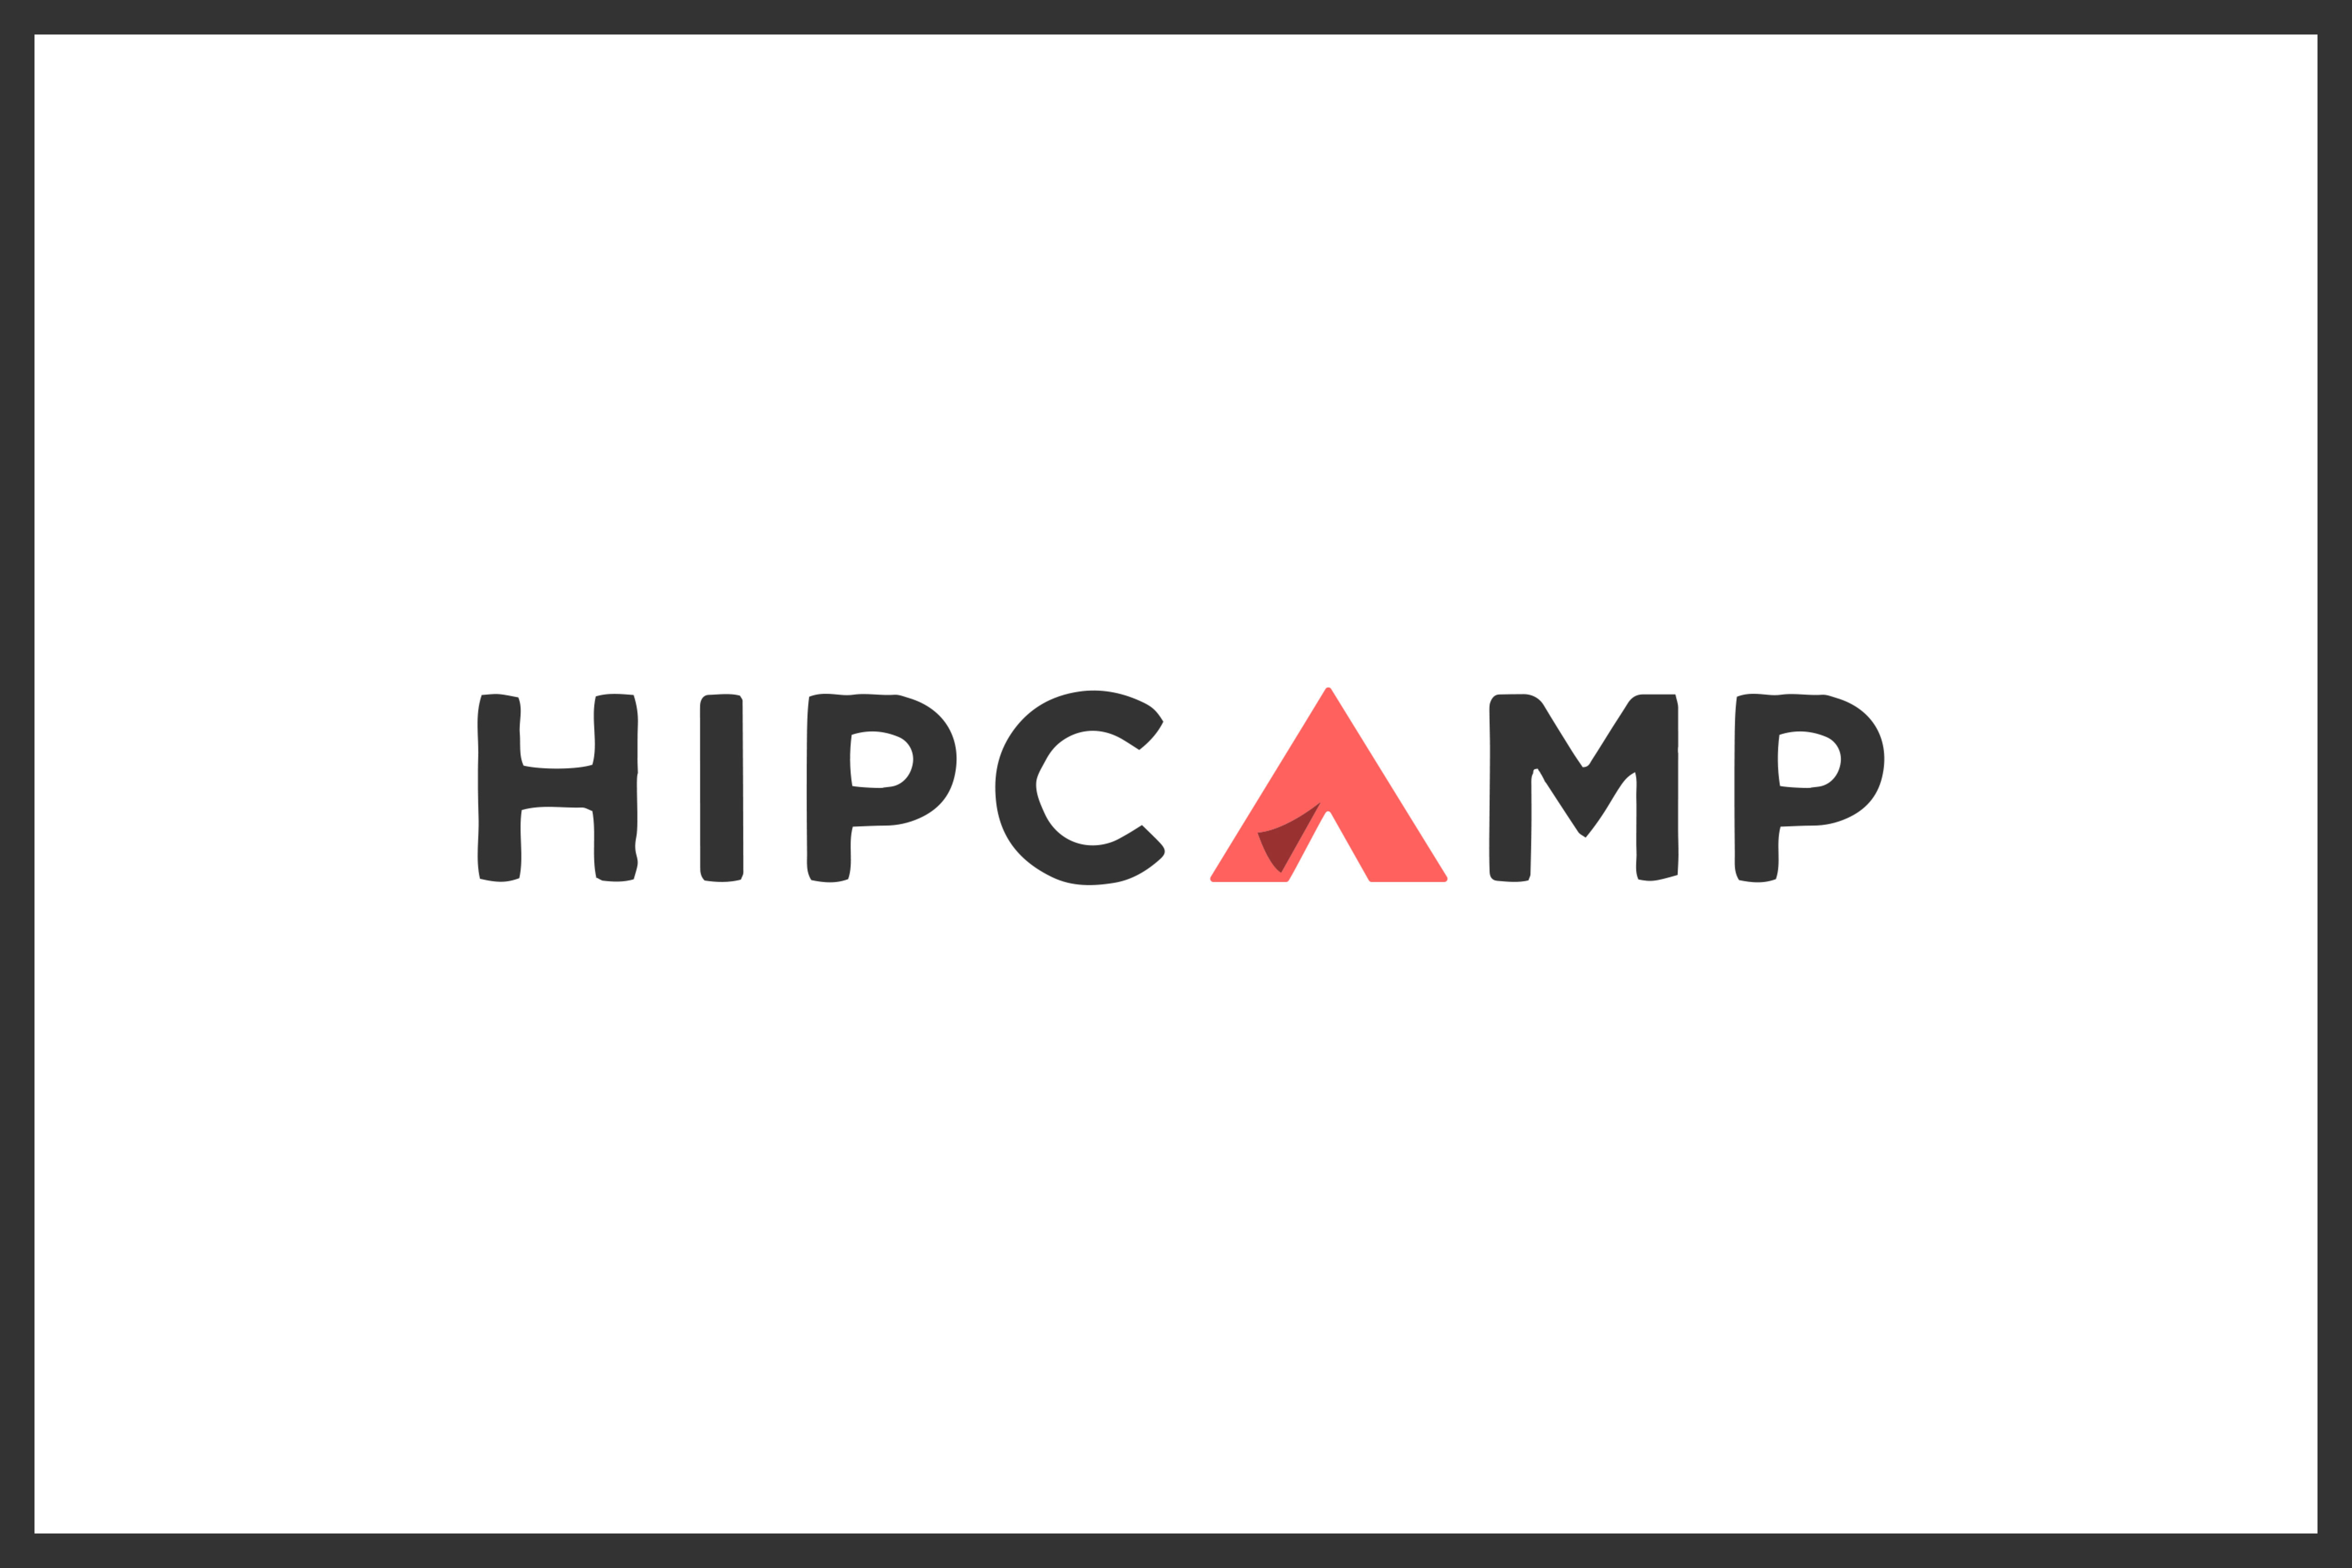 An Updated Logo for Hipcamp